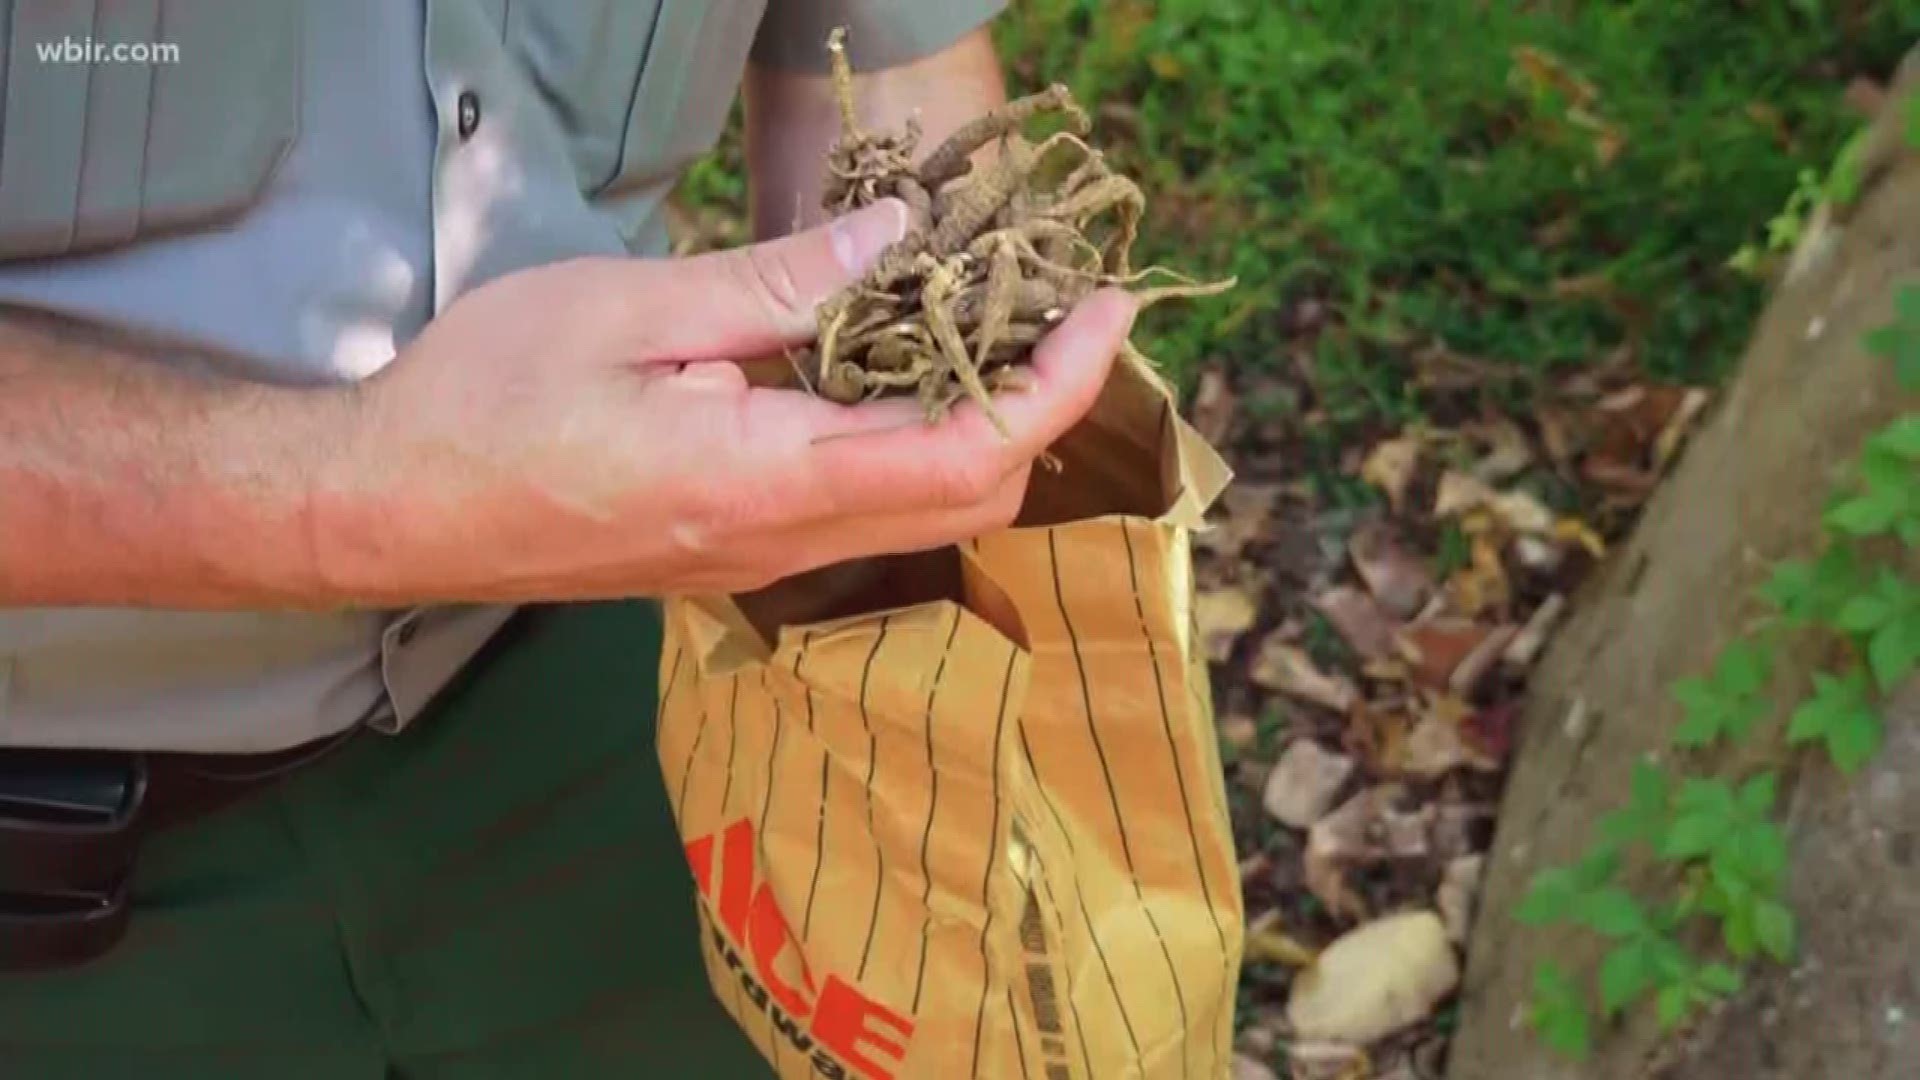 Oct. 18, 2017: Rangers in the Great Smoky Mountains National Park regularly fight treasure hunters who illegally harvest plants, especially ginseng.